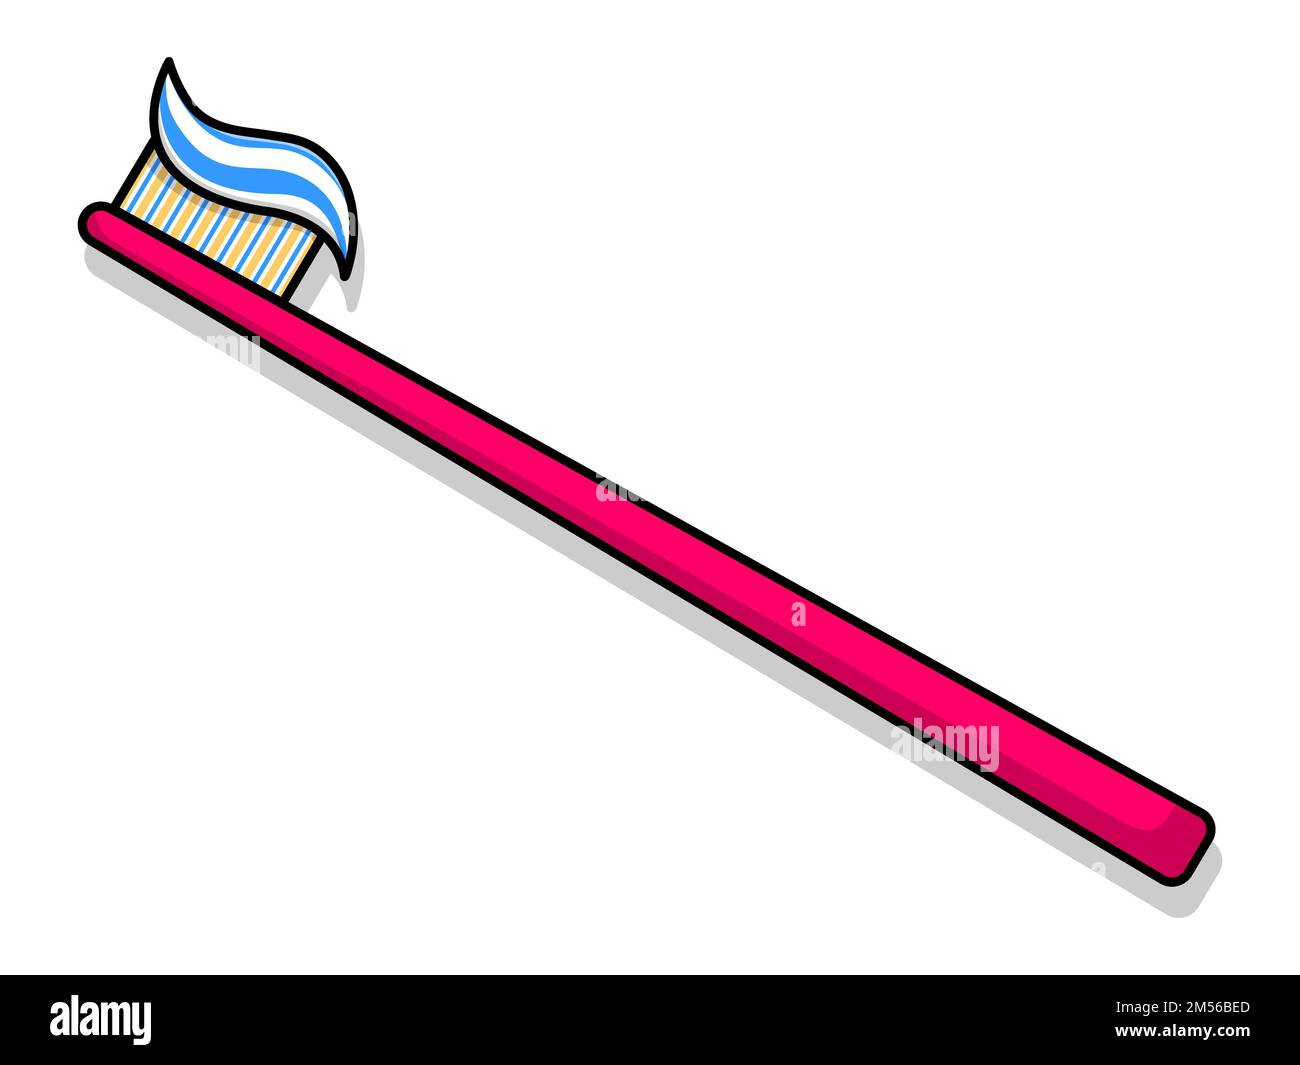 Cartoon toothbrush. Vector illustration isolated on white background. Stock Vector